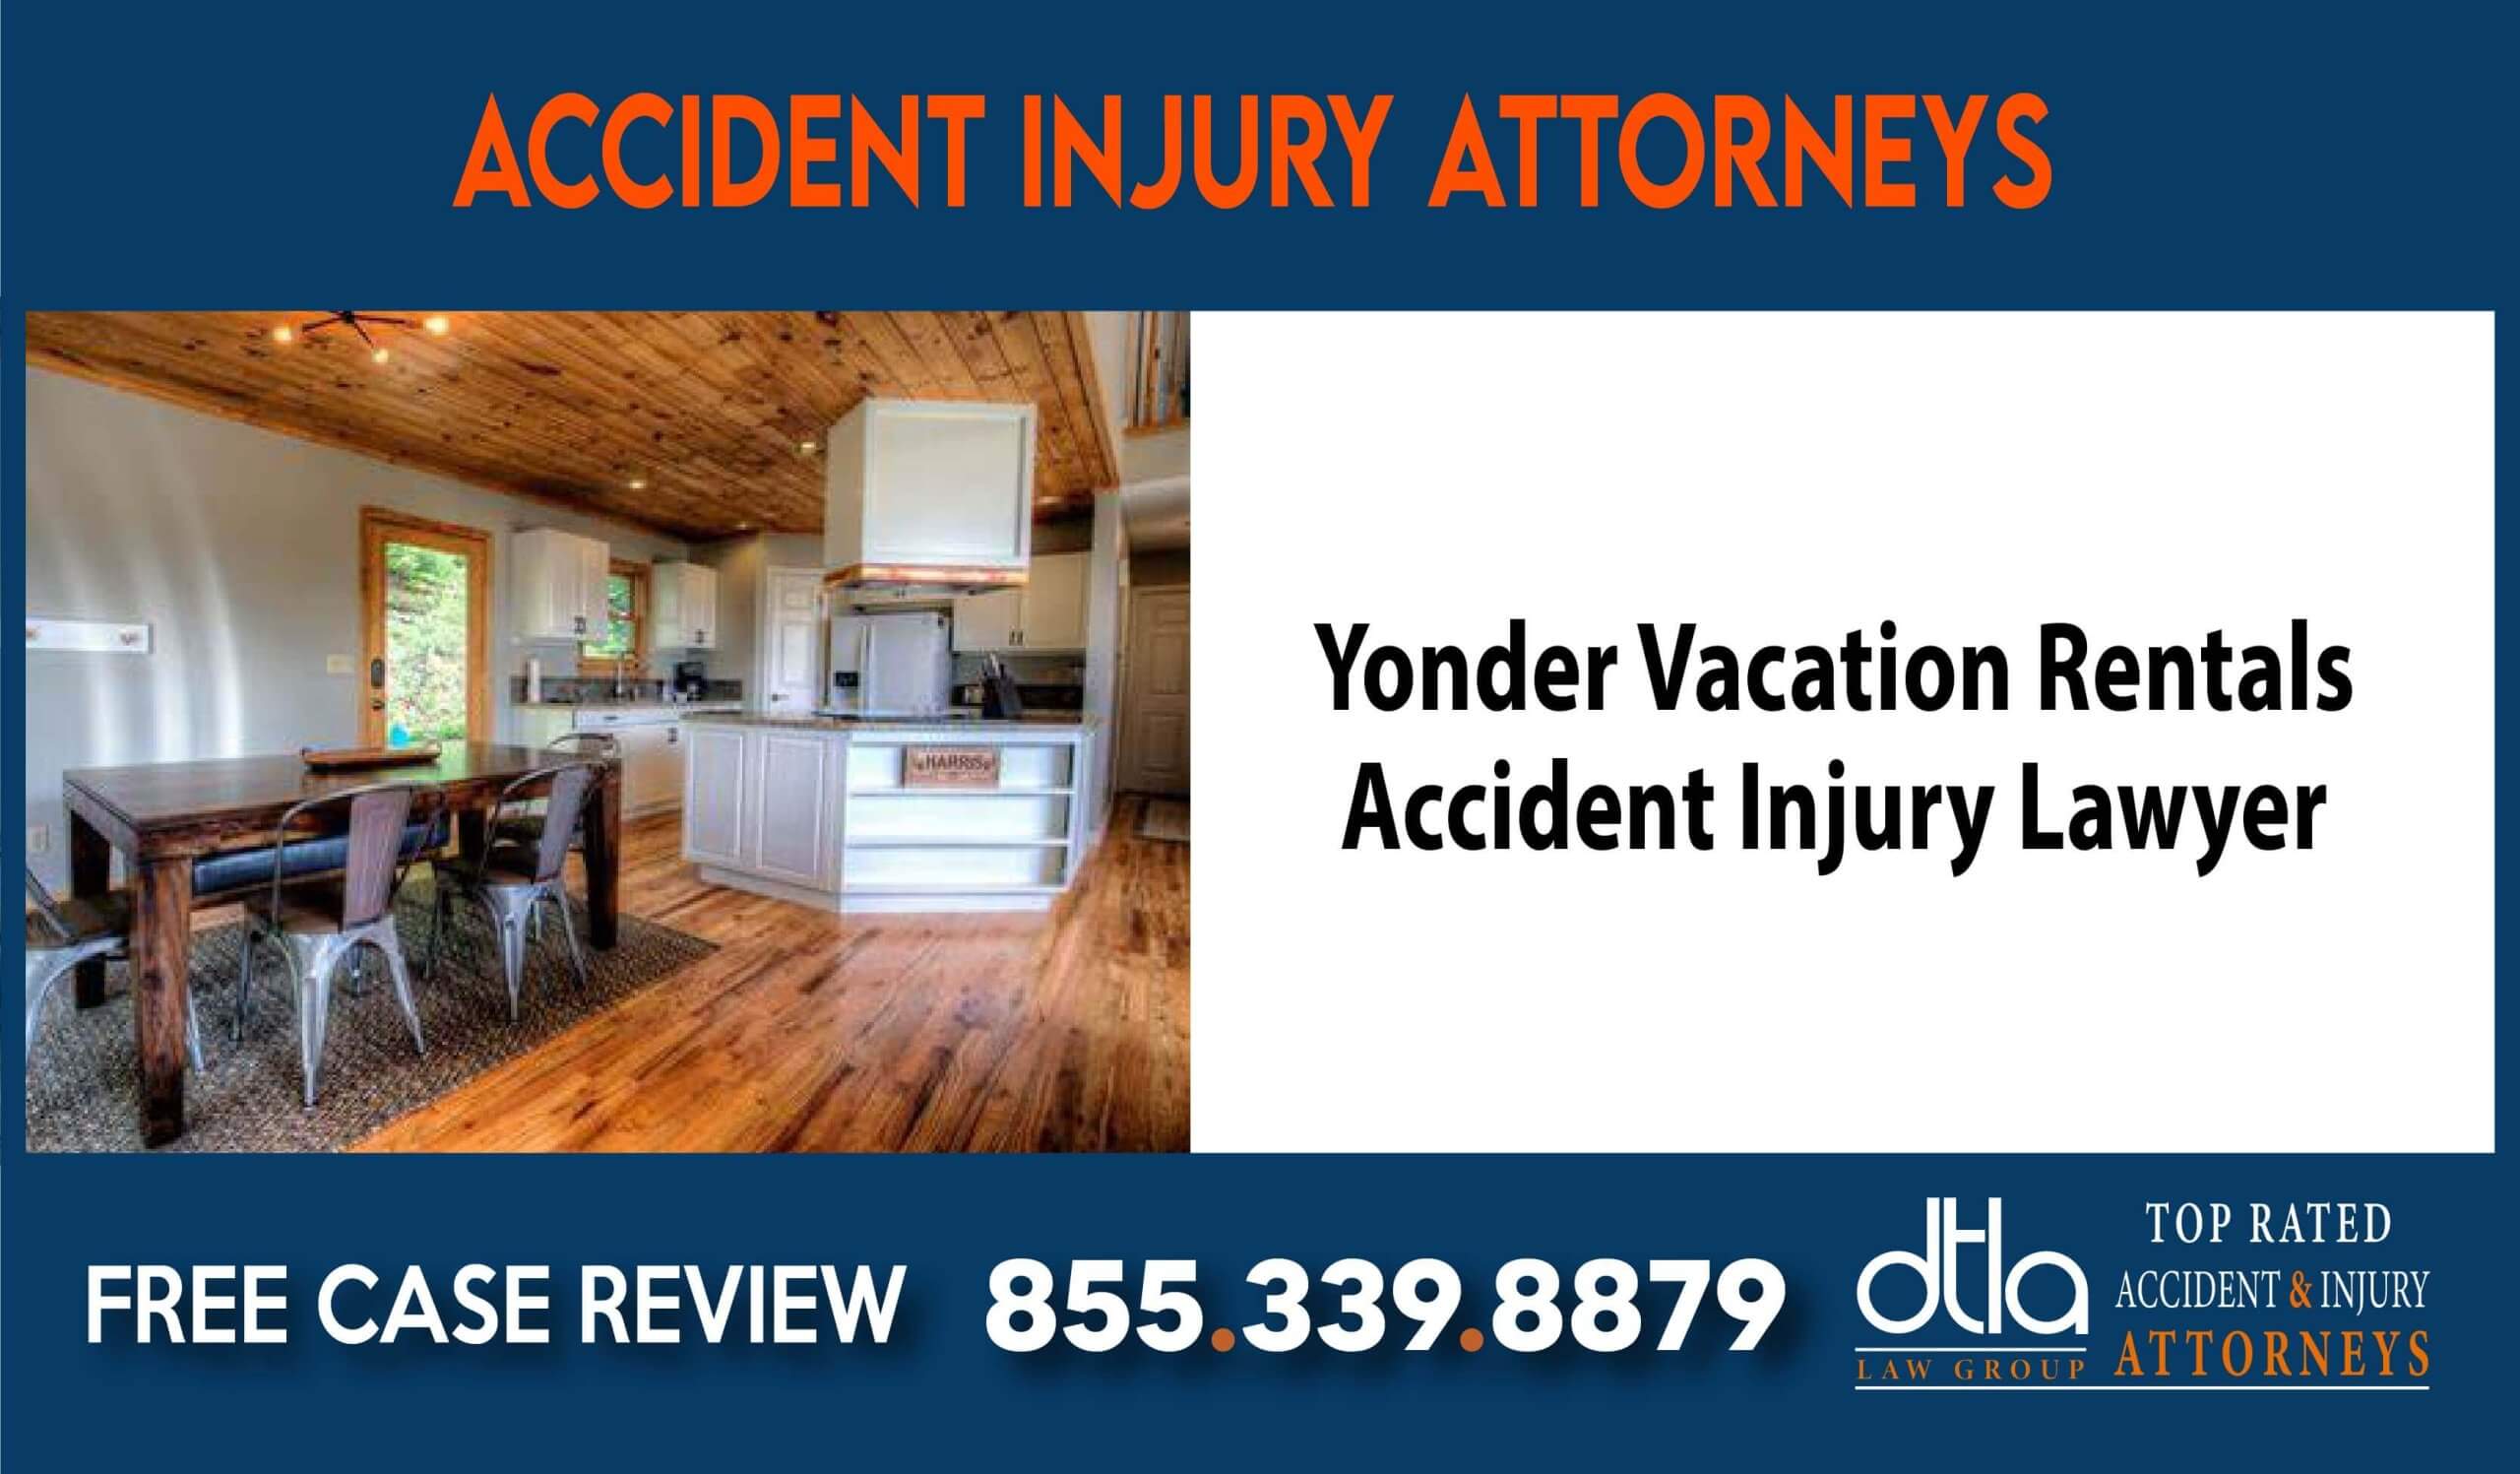 Yonder Vacation Rentals Accident Injury Lawyer sue compensation incident liability